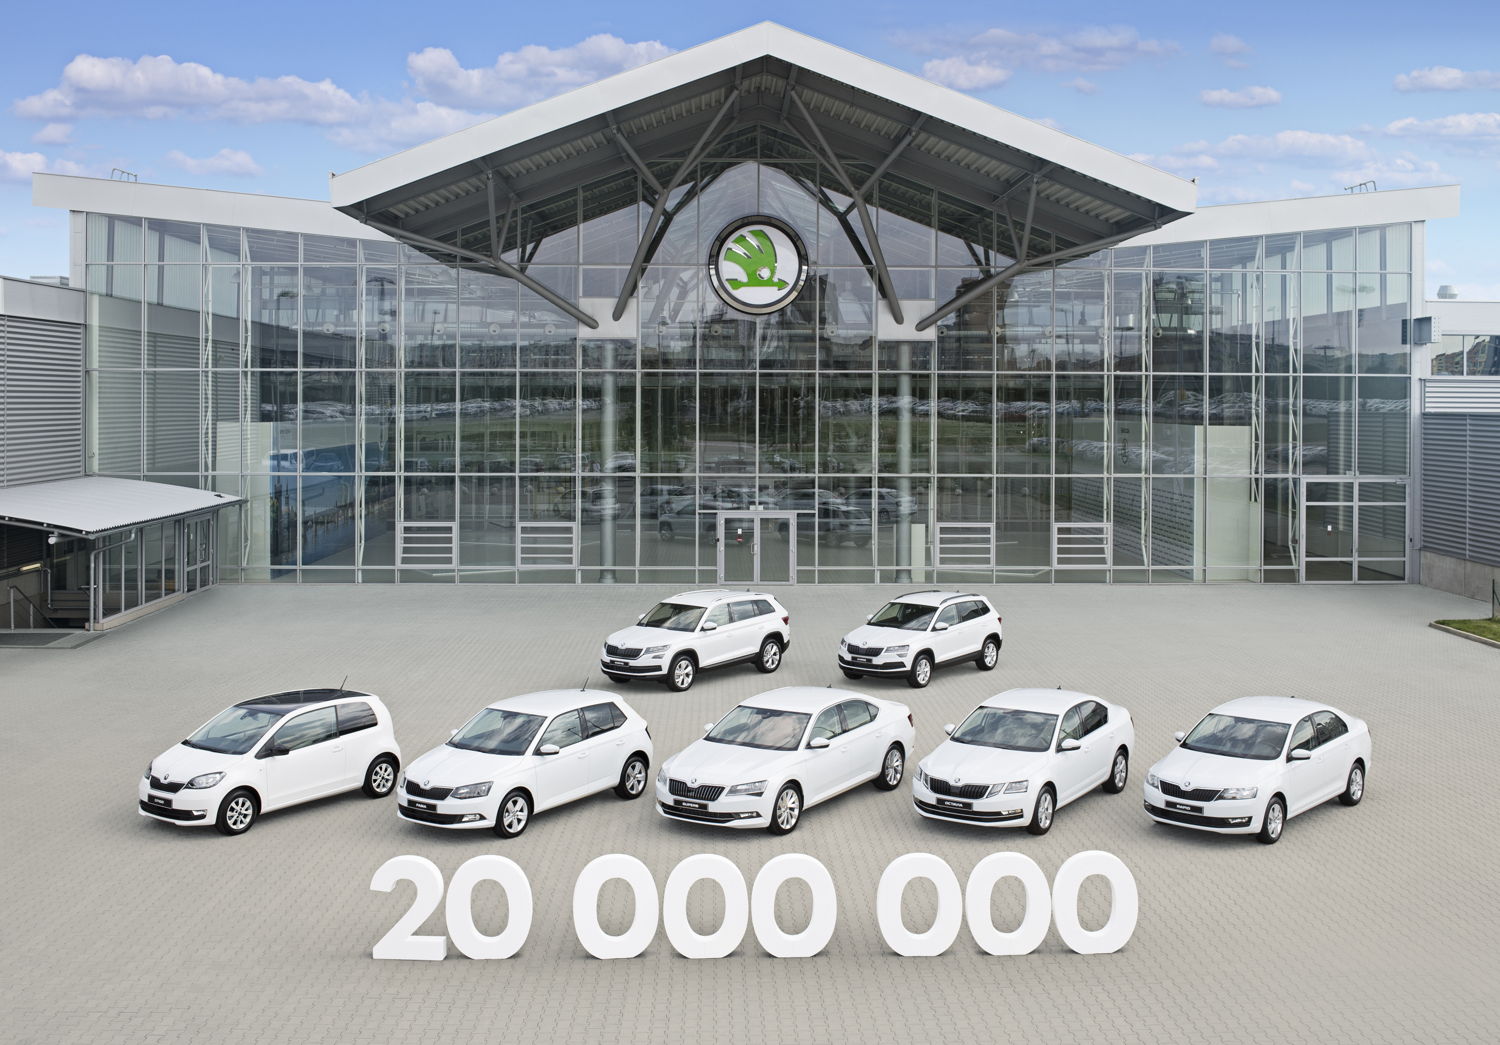 The current production milestone underlines ŠKODA AUTO’s successful growth strategy. ŠKODA’s development has been exemplary, particularly since becoming part of Volkswagen Group in 1991.